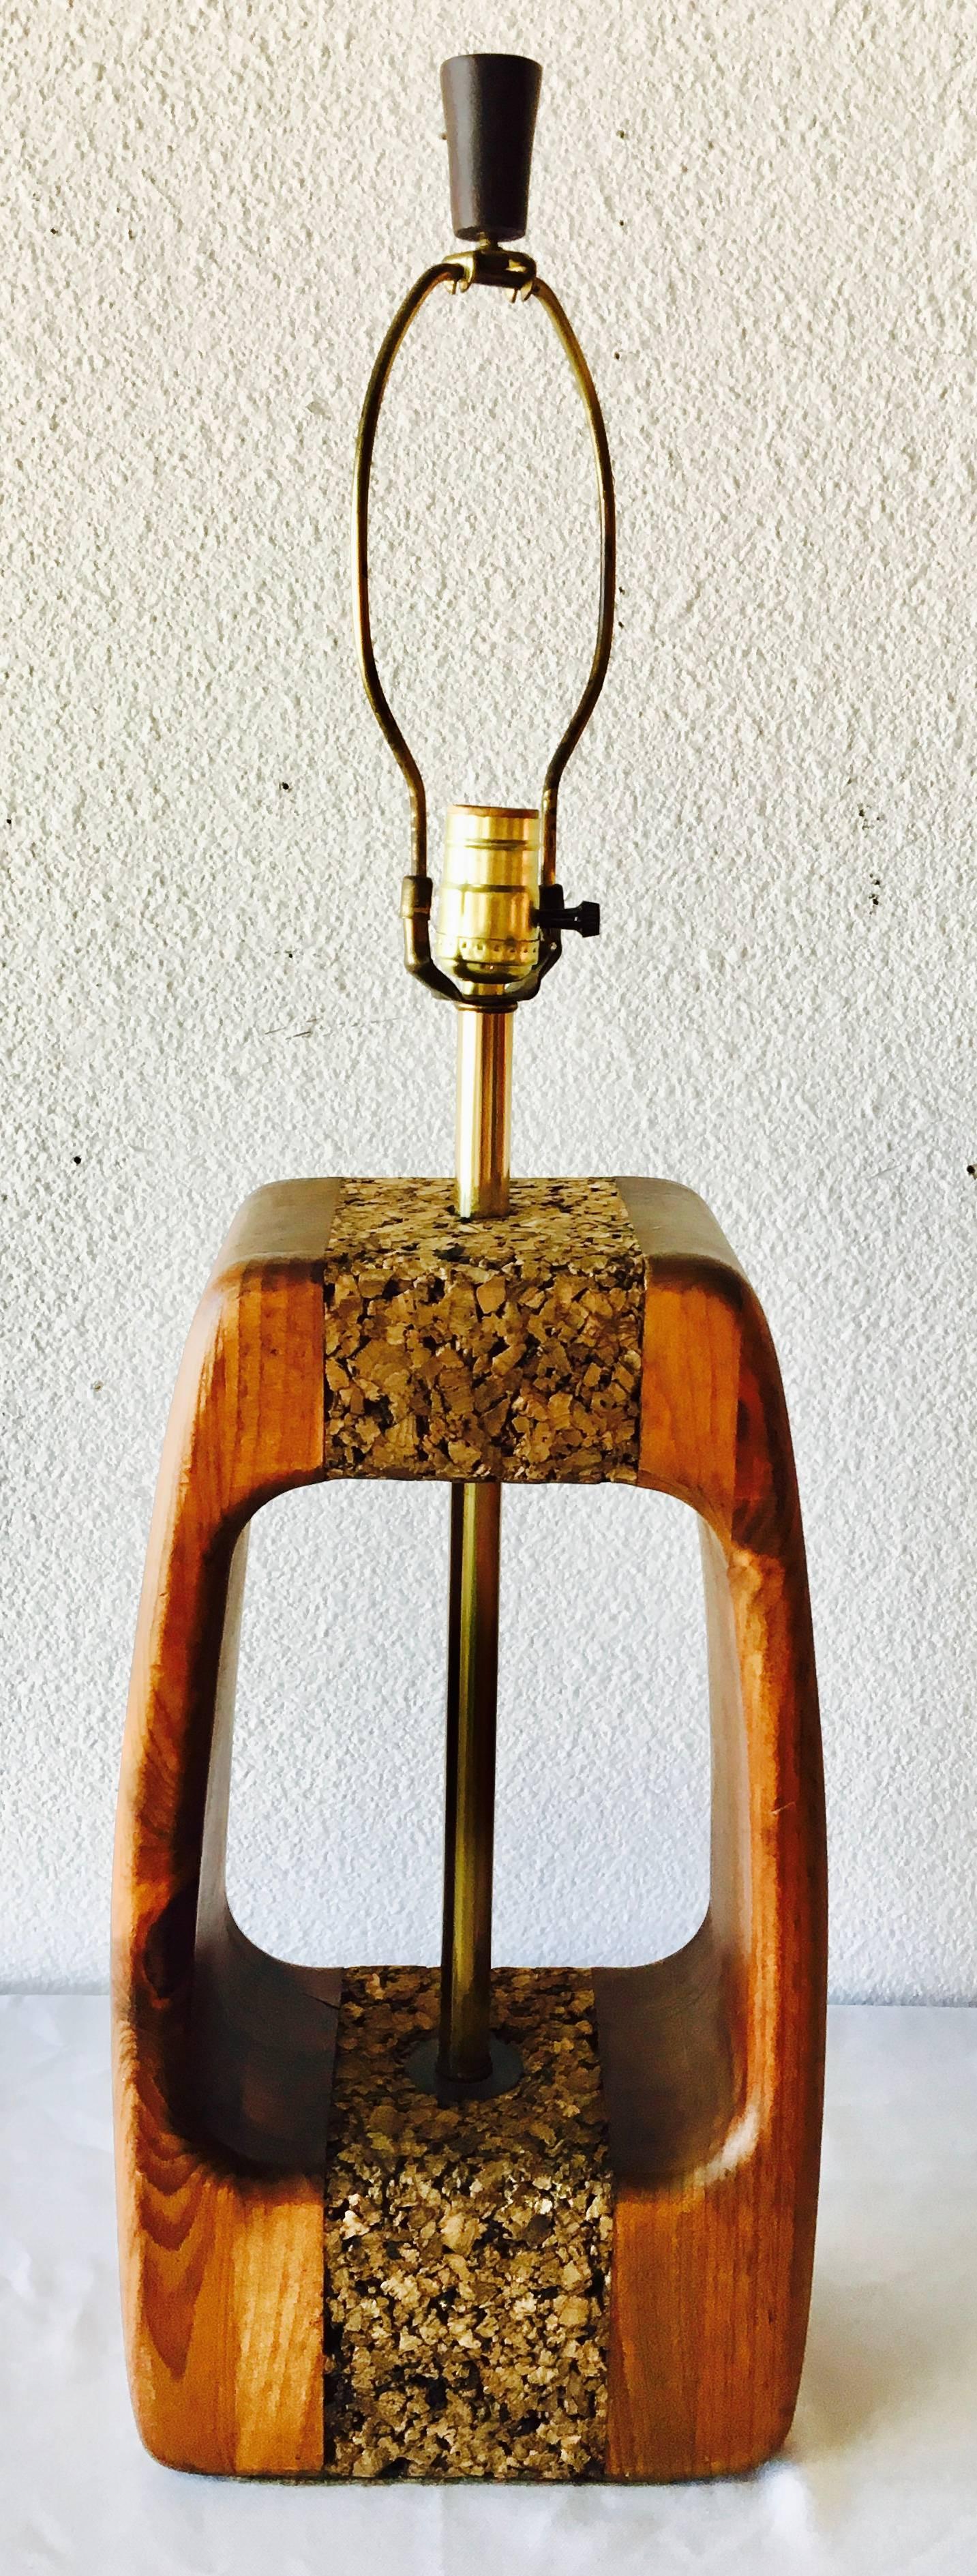 Carved walnut with cork inlays and open space revealing a center brass rod. This Mid-Century Modern beauty exemplifies the organic trends of the later 1960s into the 1970s.